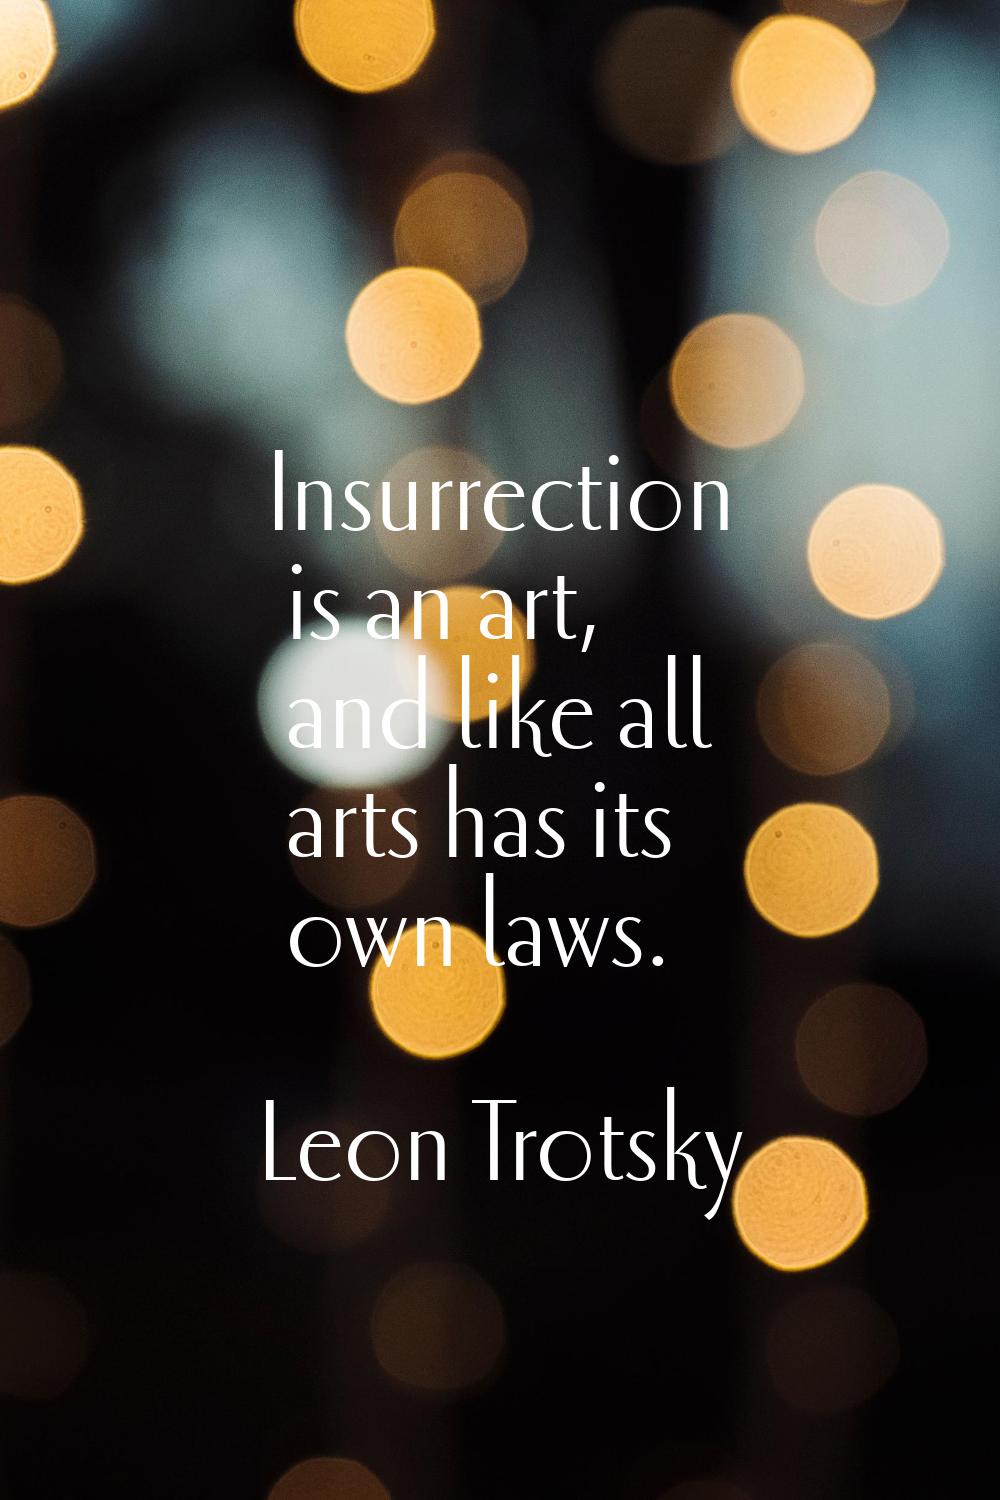 Insurrection is an art, and like all arts has its own laws.